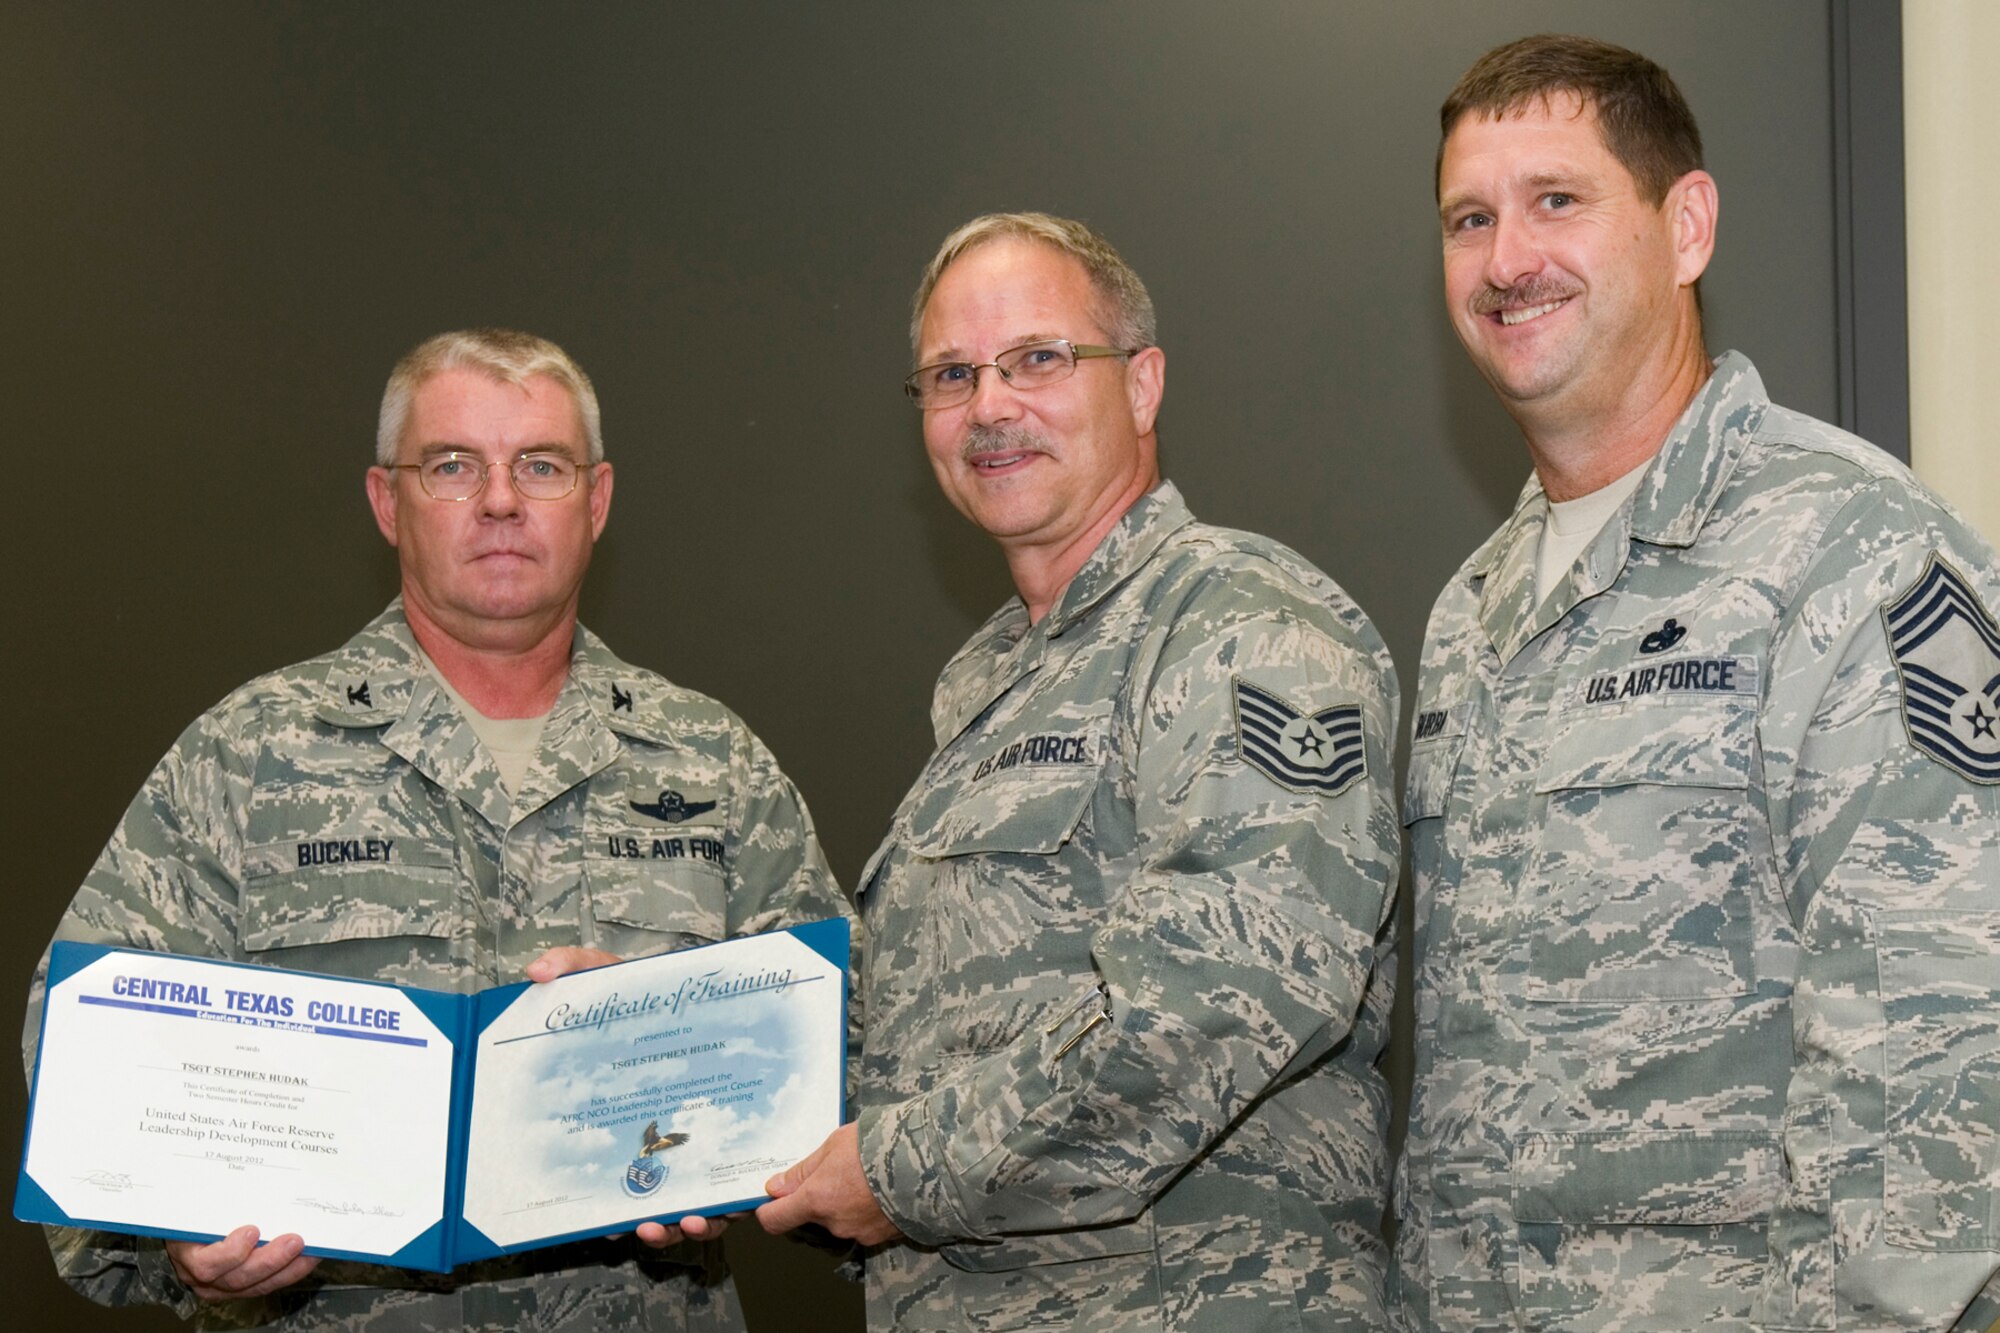 GRISSOM AIR RESERVE BASE, Ind. -- Tech. Sgt. Stephen Hudak, 434th Civil Engineer Squadron HVAC and refridgeration journeyman, receives a certificate of training from Col. Don Buckley, 434th Air Refueling Wing commander, and Chief Master Sergeant James Burba, 434th Maintenance Operations Flight maintenance superintendent, at a graduation ceremony for a Non-Commissioned Officer Leadership Development Course here Aug. 17. Hudak graduated the course with 20 other NCOs. (U.S. Air Force photo/Senior Airman Andrew McLaughlin)